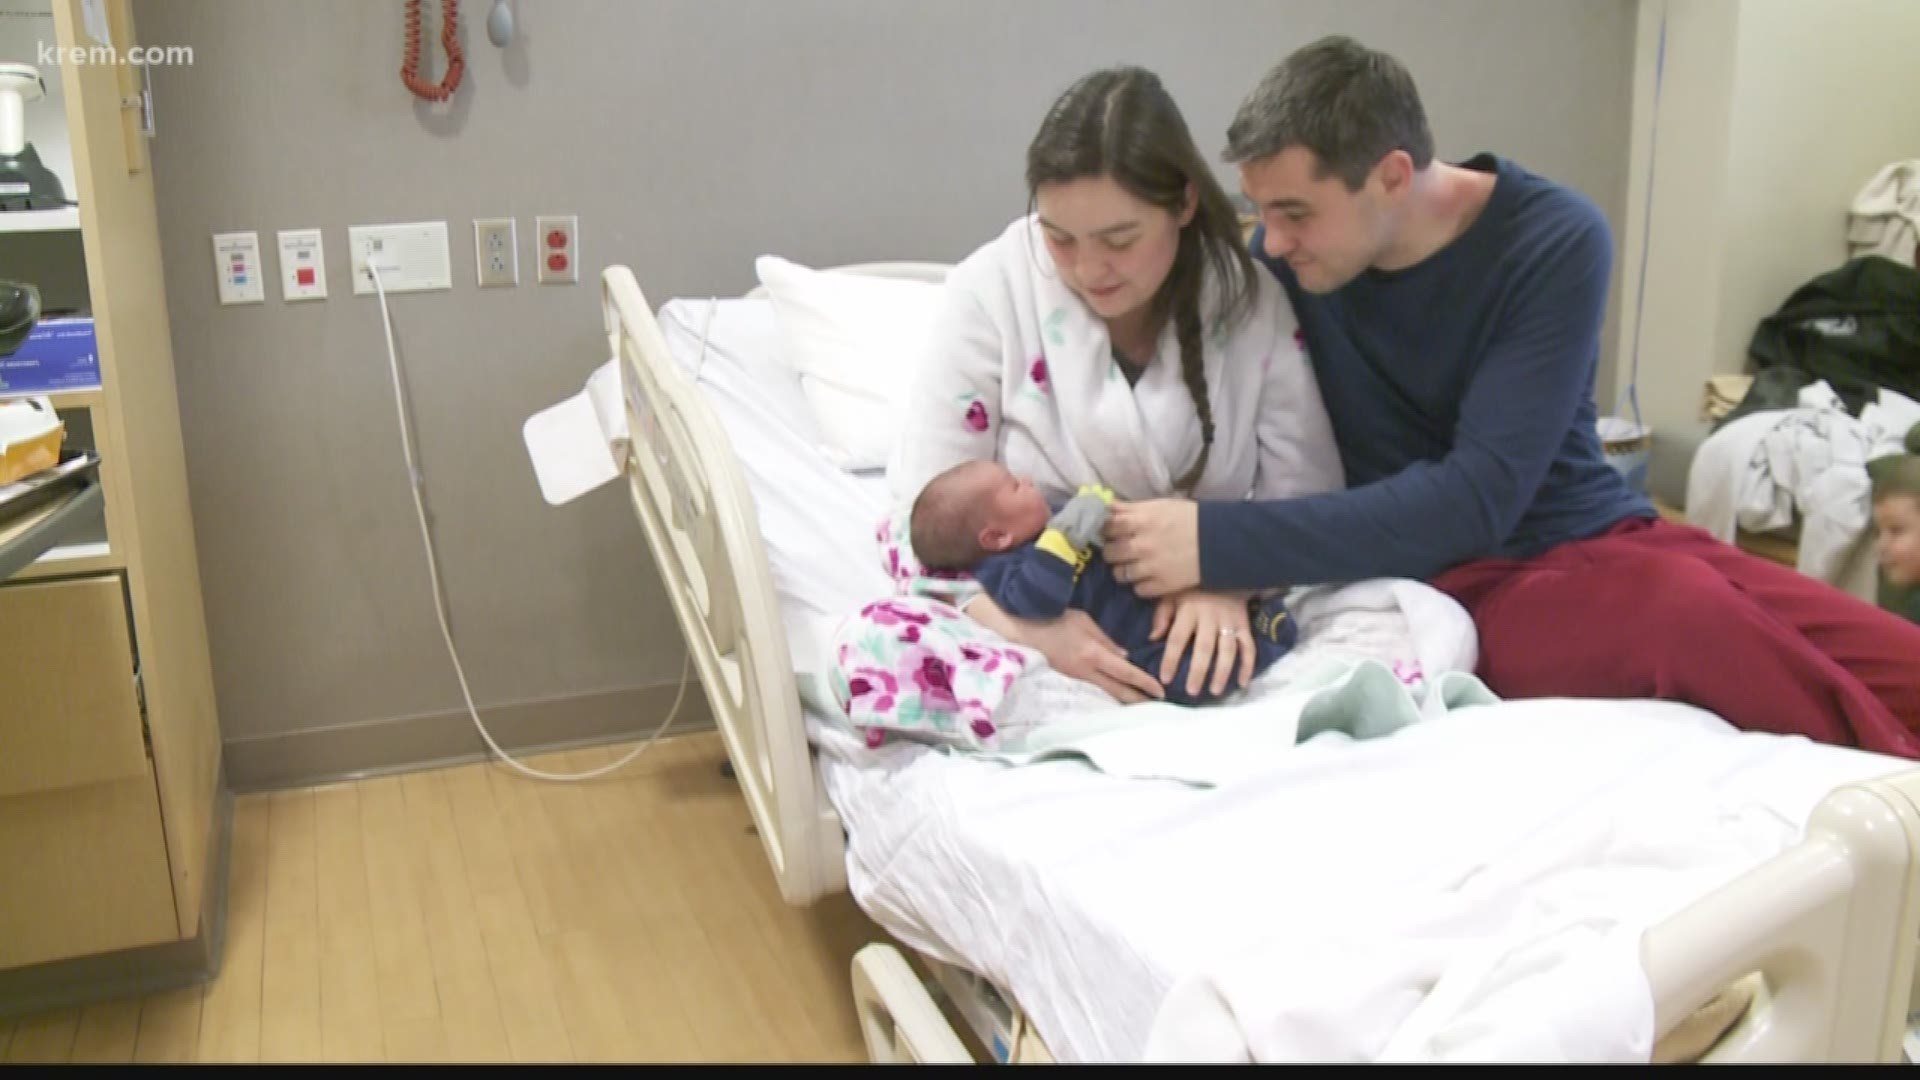 They said the hospital called around to the other hospitals in Spokane to find out if he was the first baby born in the area.